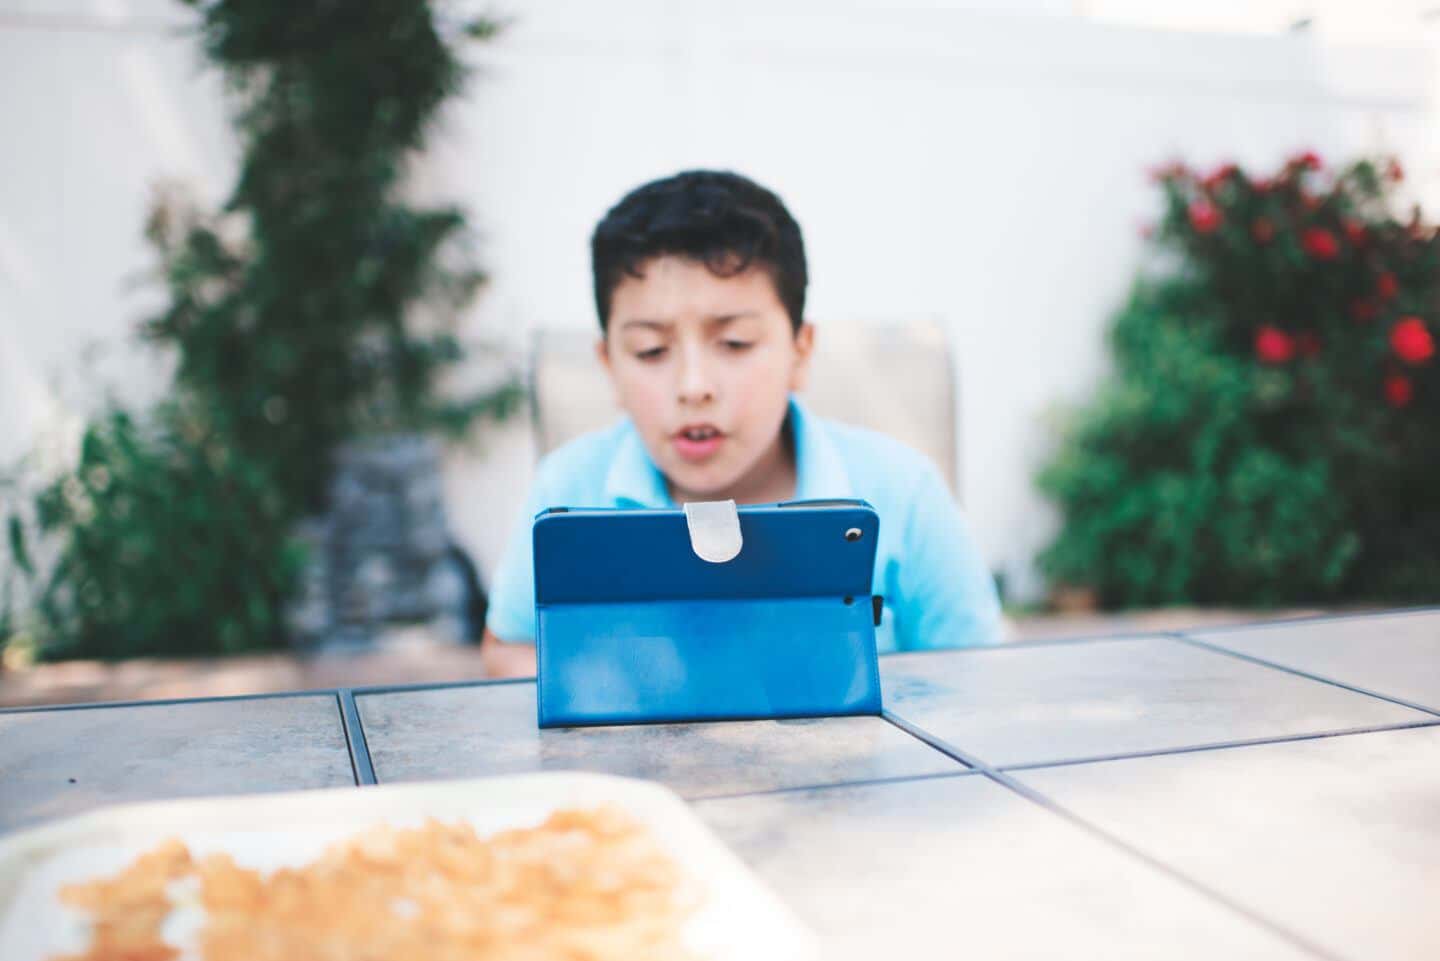 EndeavorRx: young boy playing with ipad outside